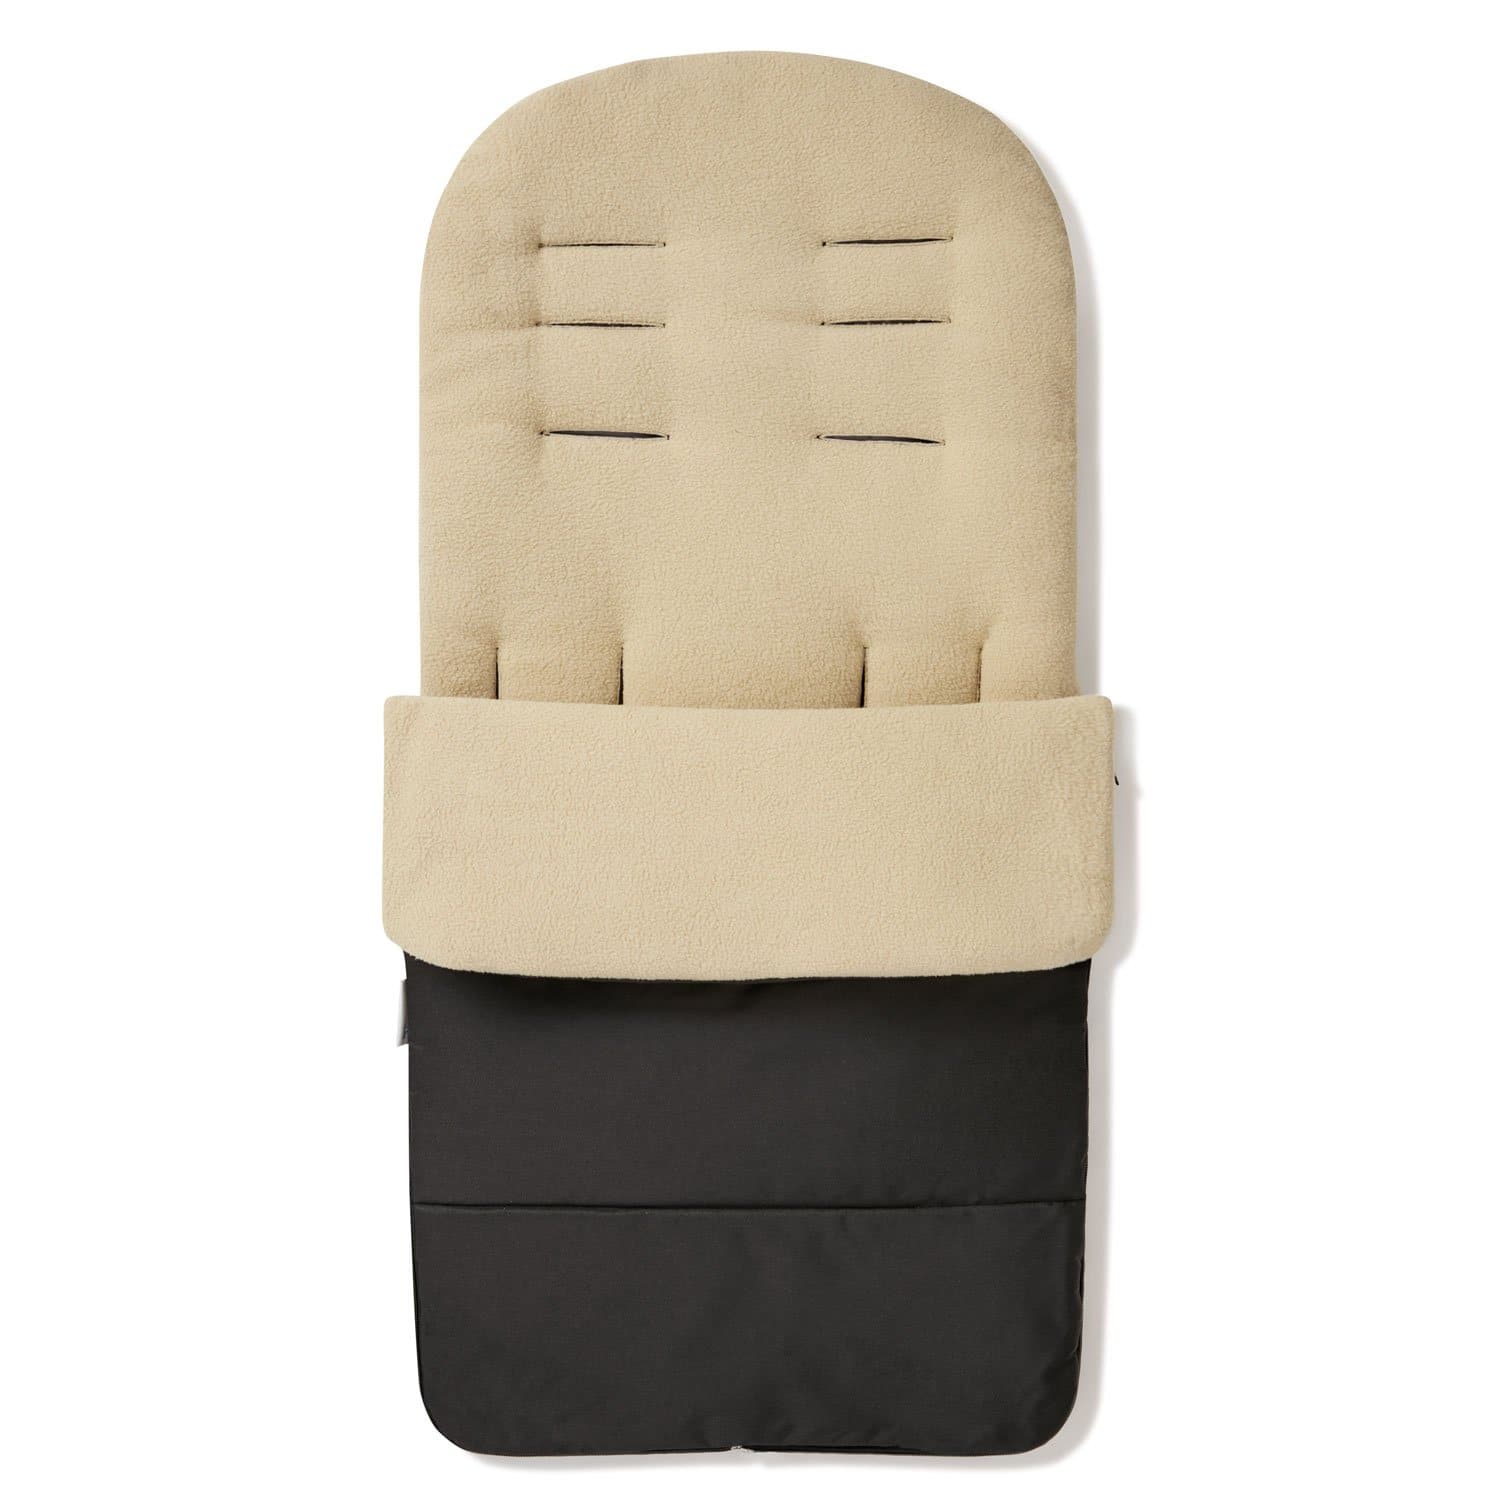 Premium Footmuff / Cosy Toes Compatible with Baby Trend - Desert Sand / Fits All Models | For Your Little One